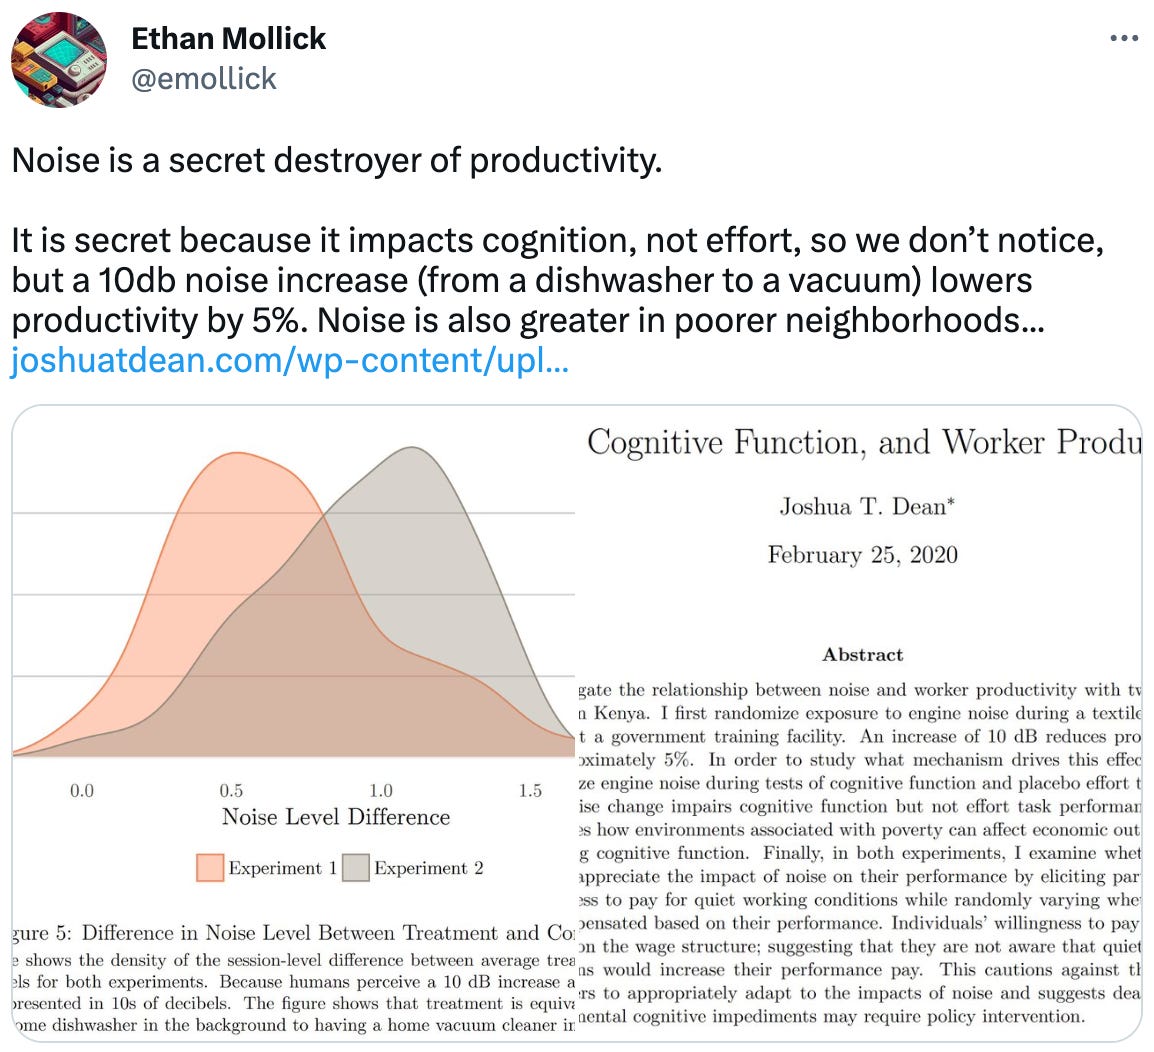  Ethan Mollick @emollick Noise is a secret destroyer of productivity.  It is secret because it impacts cognition, not effort, so we don’t notice, but a 10db noise increase (from a dishwasher to a vacuum) lowers productivity by 5%. Noise is also greater in poorer neighborhoods... https://joshuatdean.com/wp-content/uploads/2020/02/NoiseCognitiveFunctionandWorkerProductivity.pdf